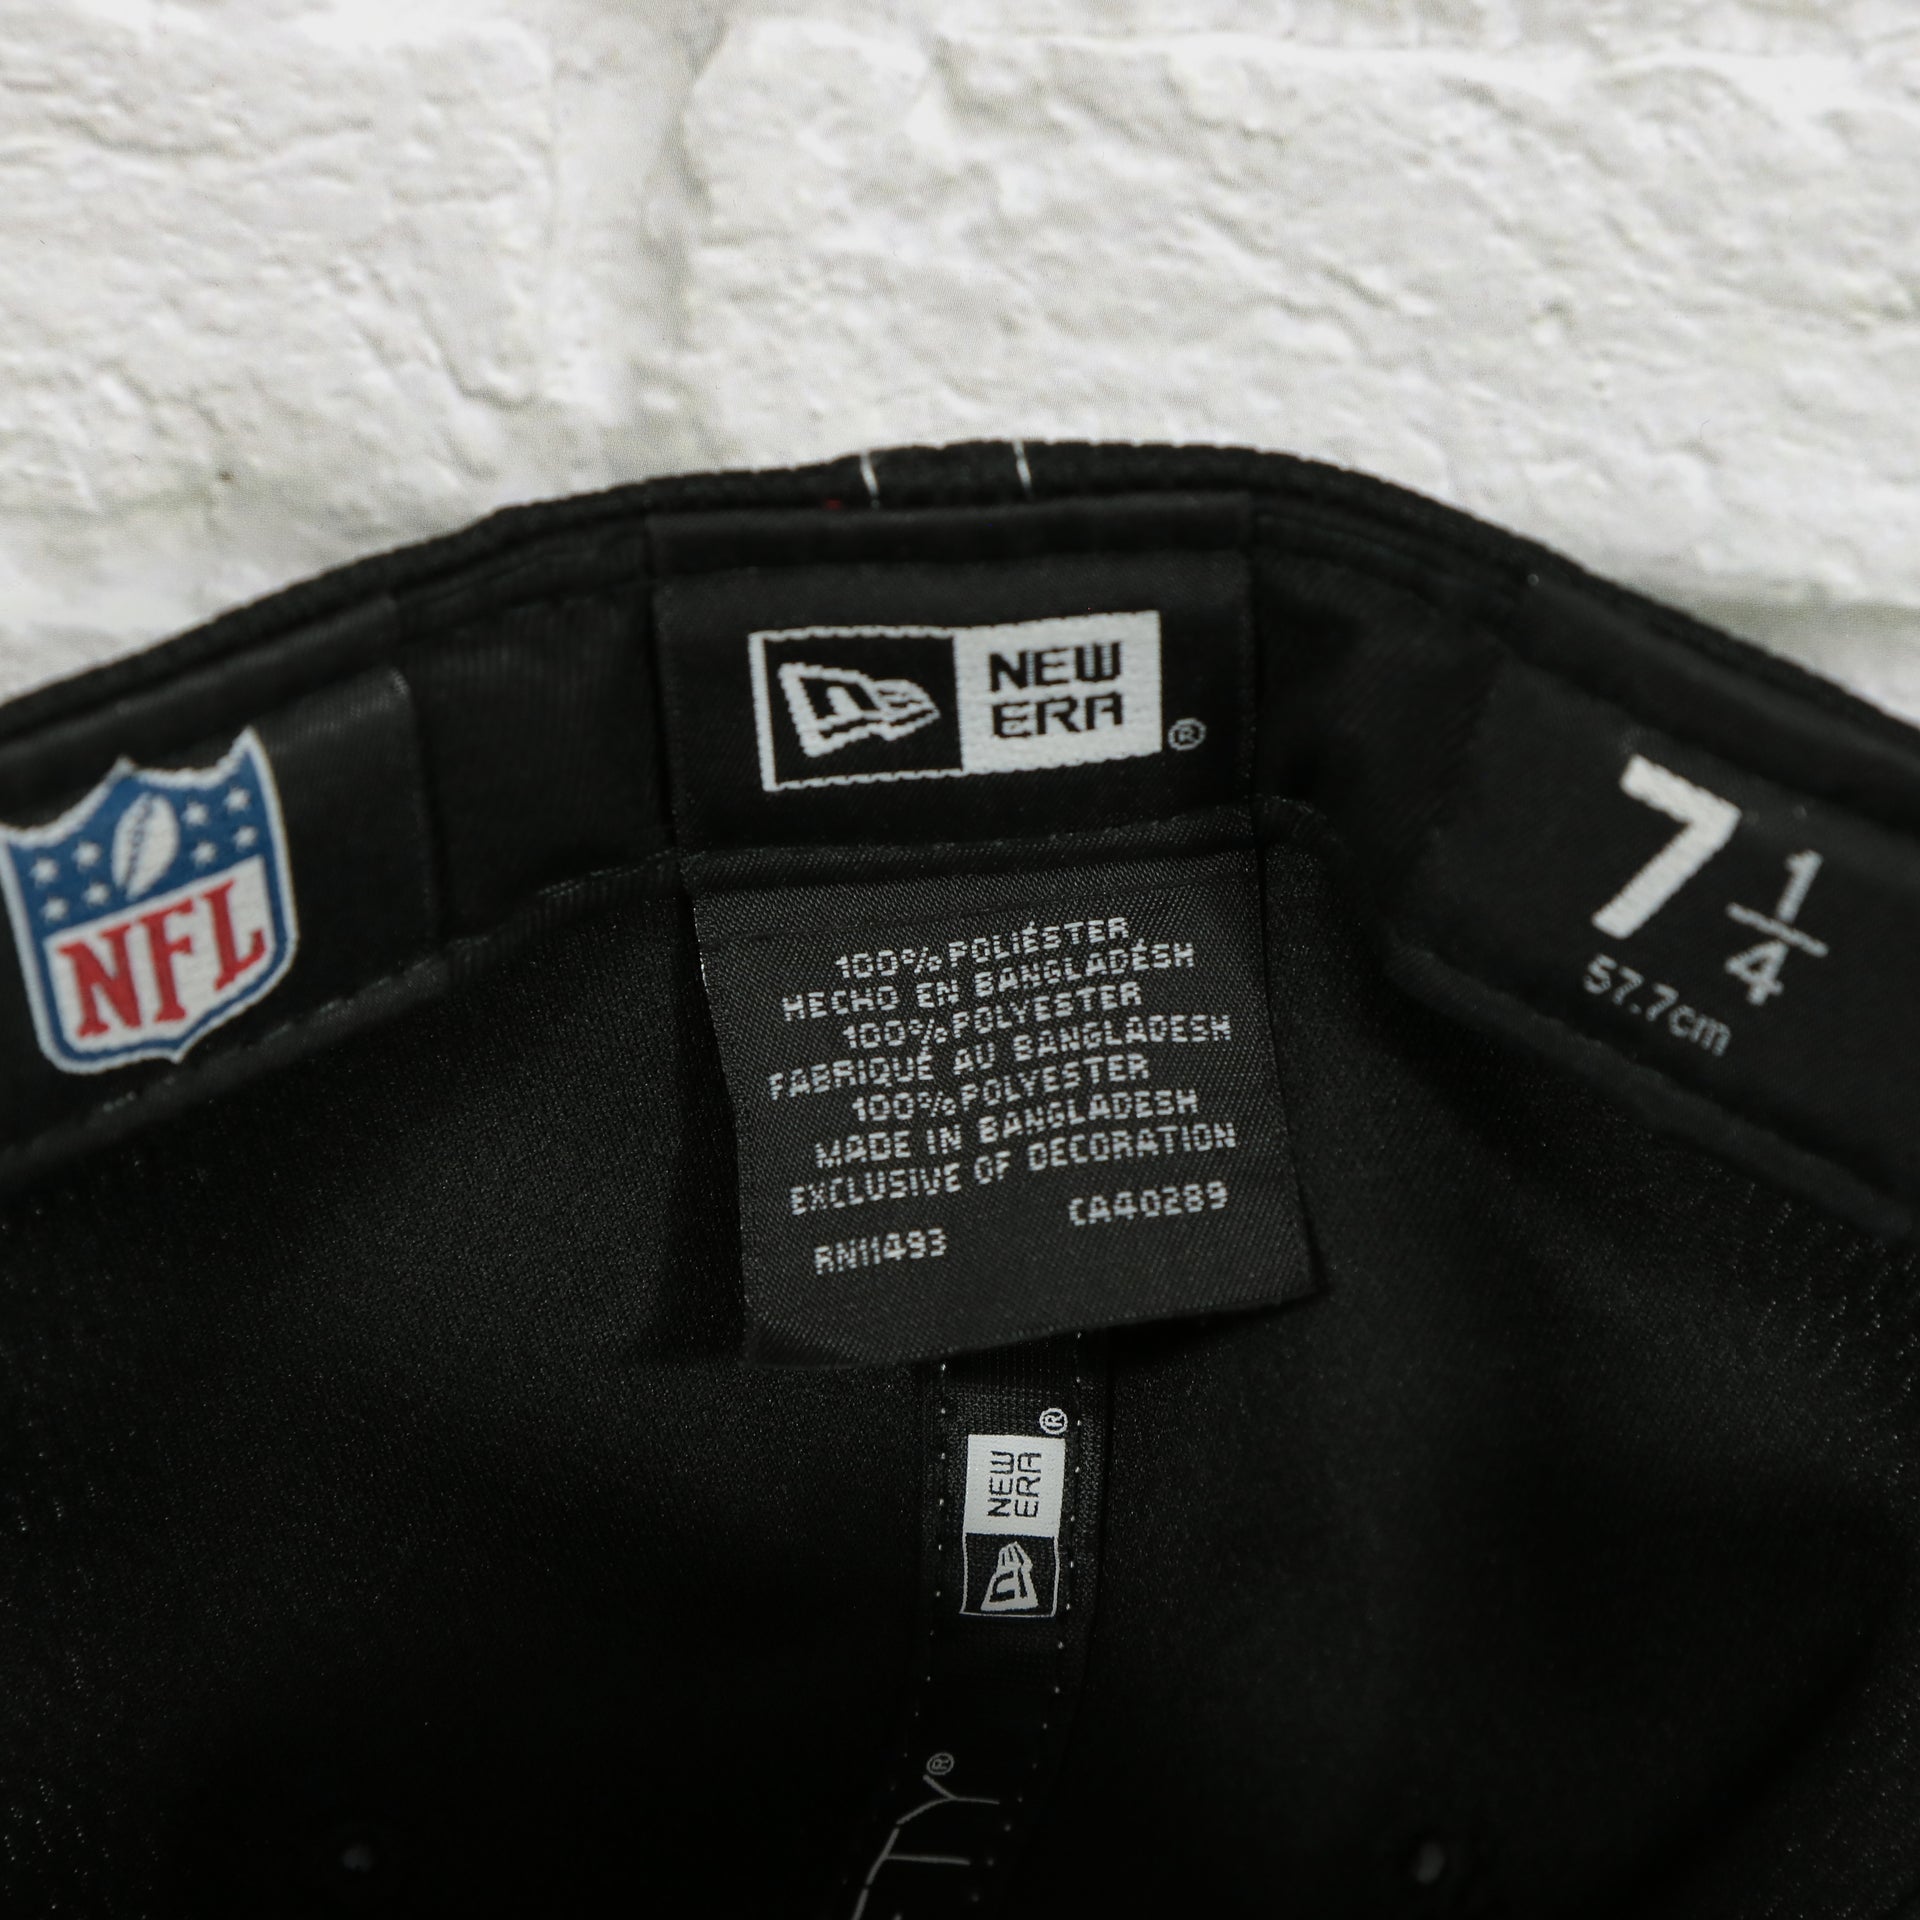 new era label on the Philadelphia Eagles NFL 2019 "1993" Eagles side patch | Black 59Fifty Fitted Cap